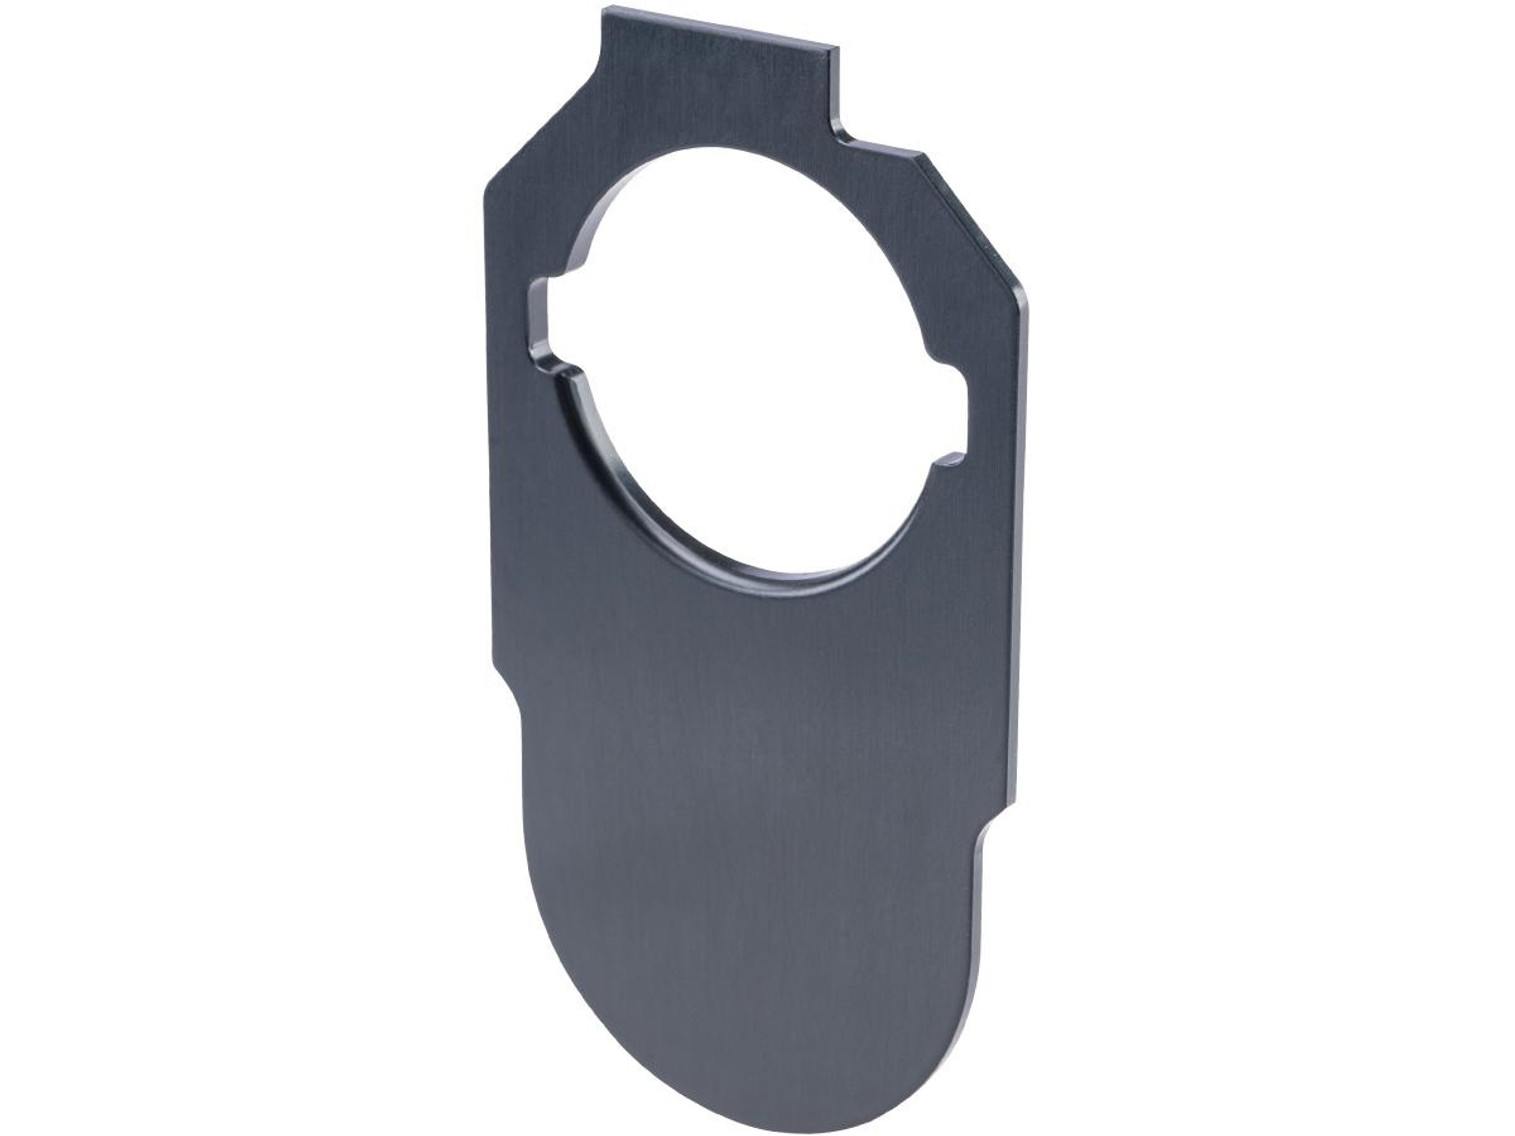 AZTECH Innovations Aluminum Rear Blank Plate for Chimera M4 Receivers
